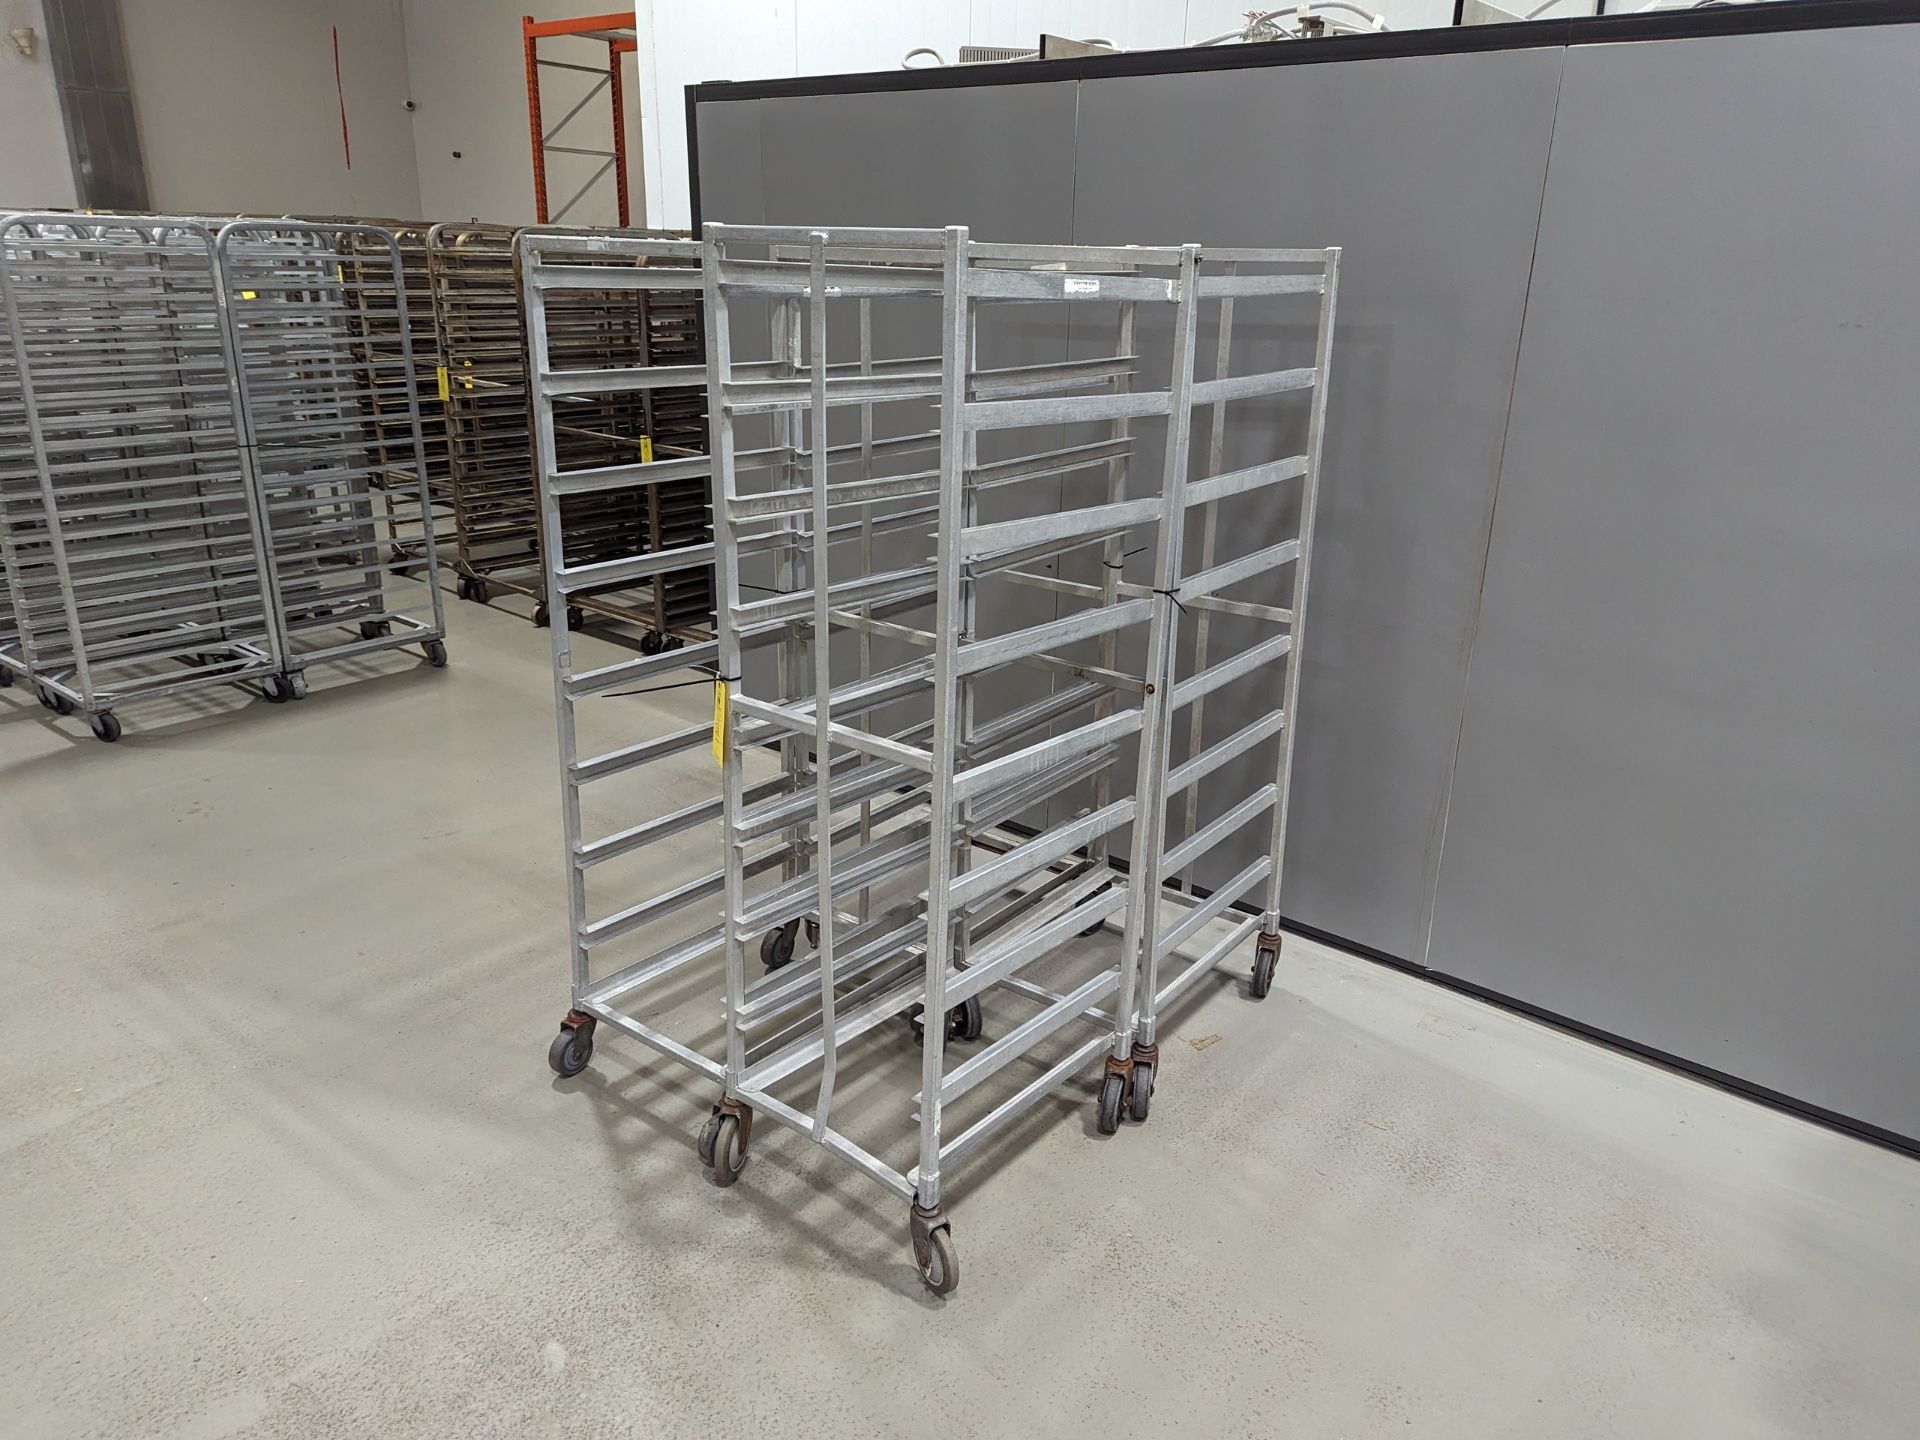 Lot of 4 Single Wide Aluminum Bakery Racks, Dimensions LxWxH: 57x37.5x69 Measurements are for lot - Image 2 of 7